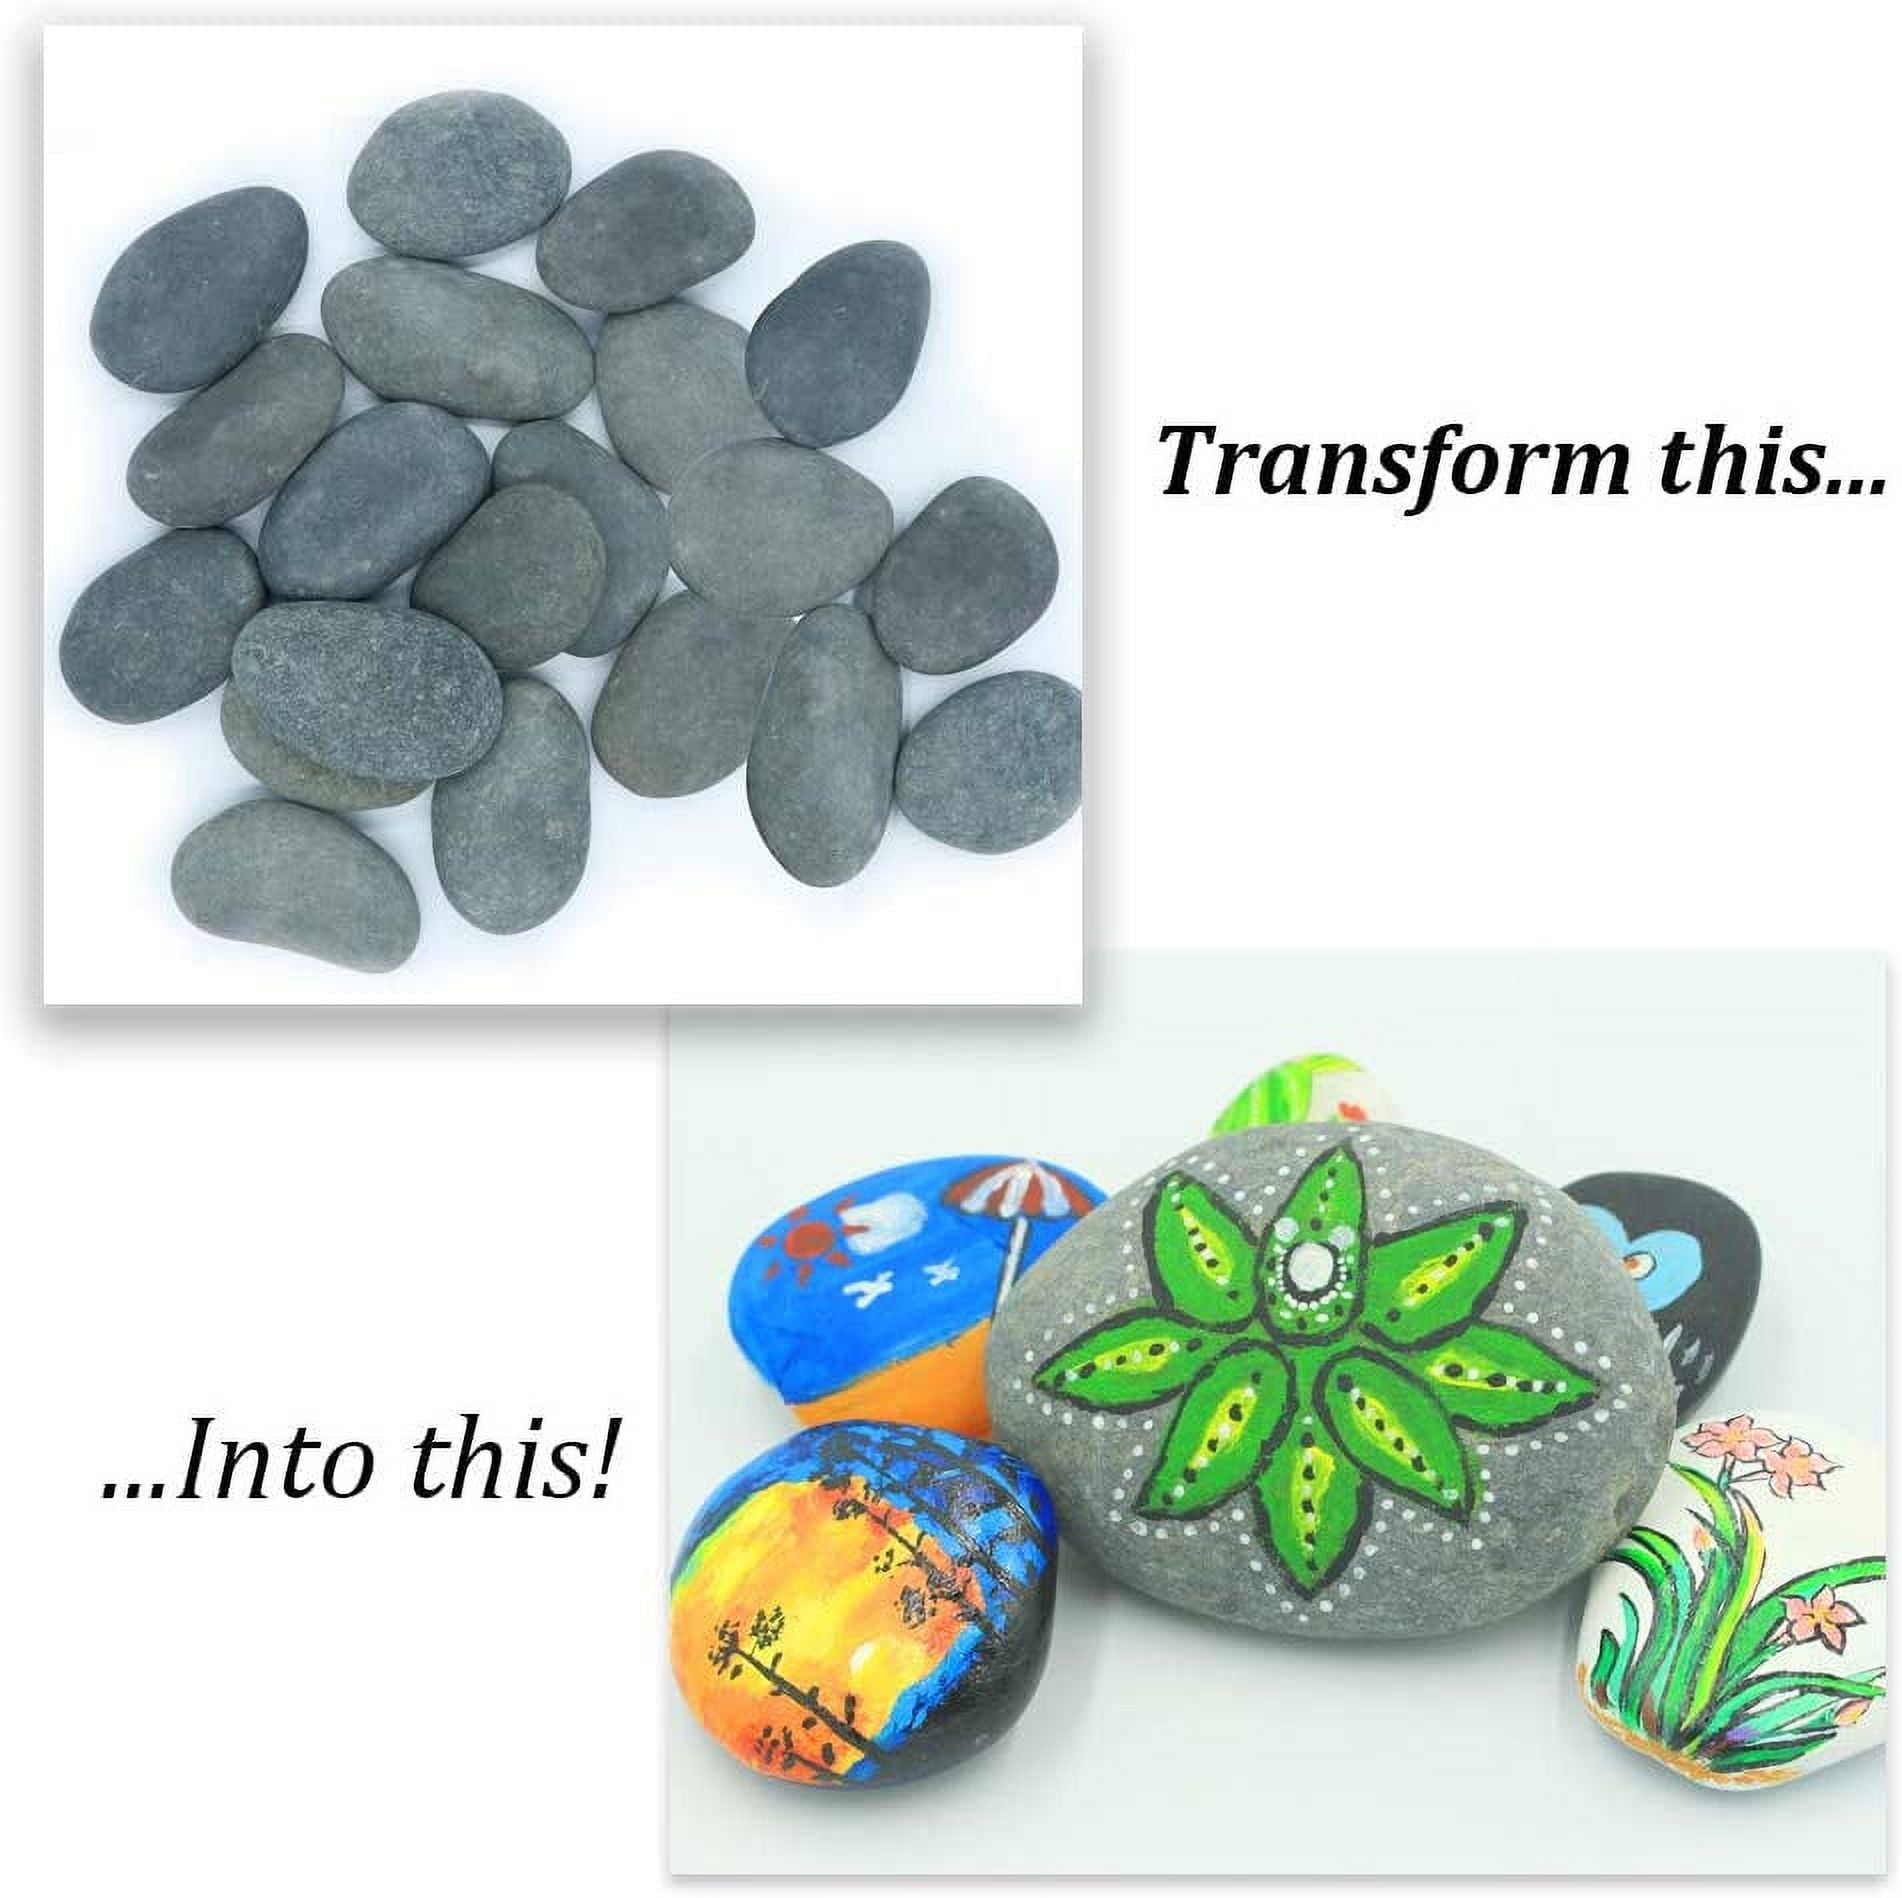  BigOtters River Rocks for Painting, 20PCS Painting Rocks Smooth  Unpolished Stones Range from About 2 to 3 inches Gift for Kids and Adults  Outdoor Rock Art